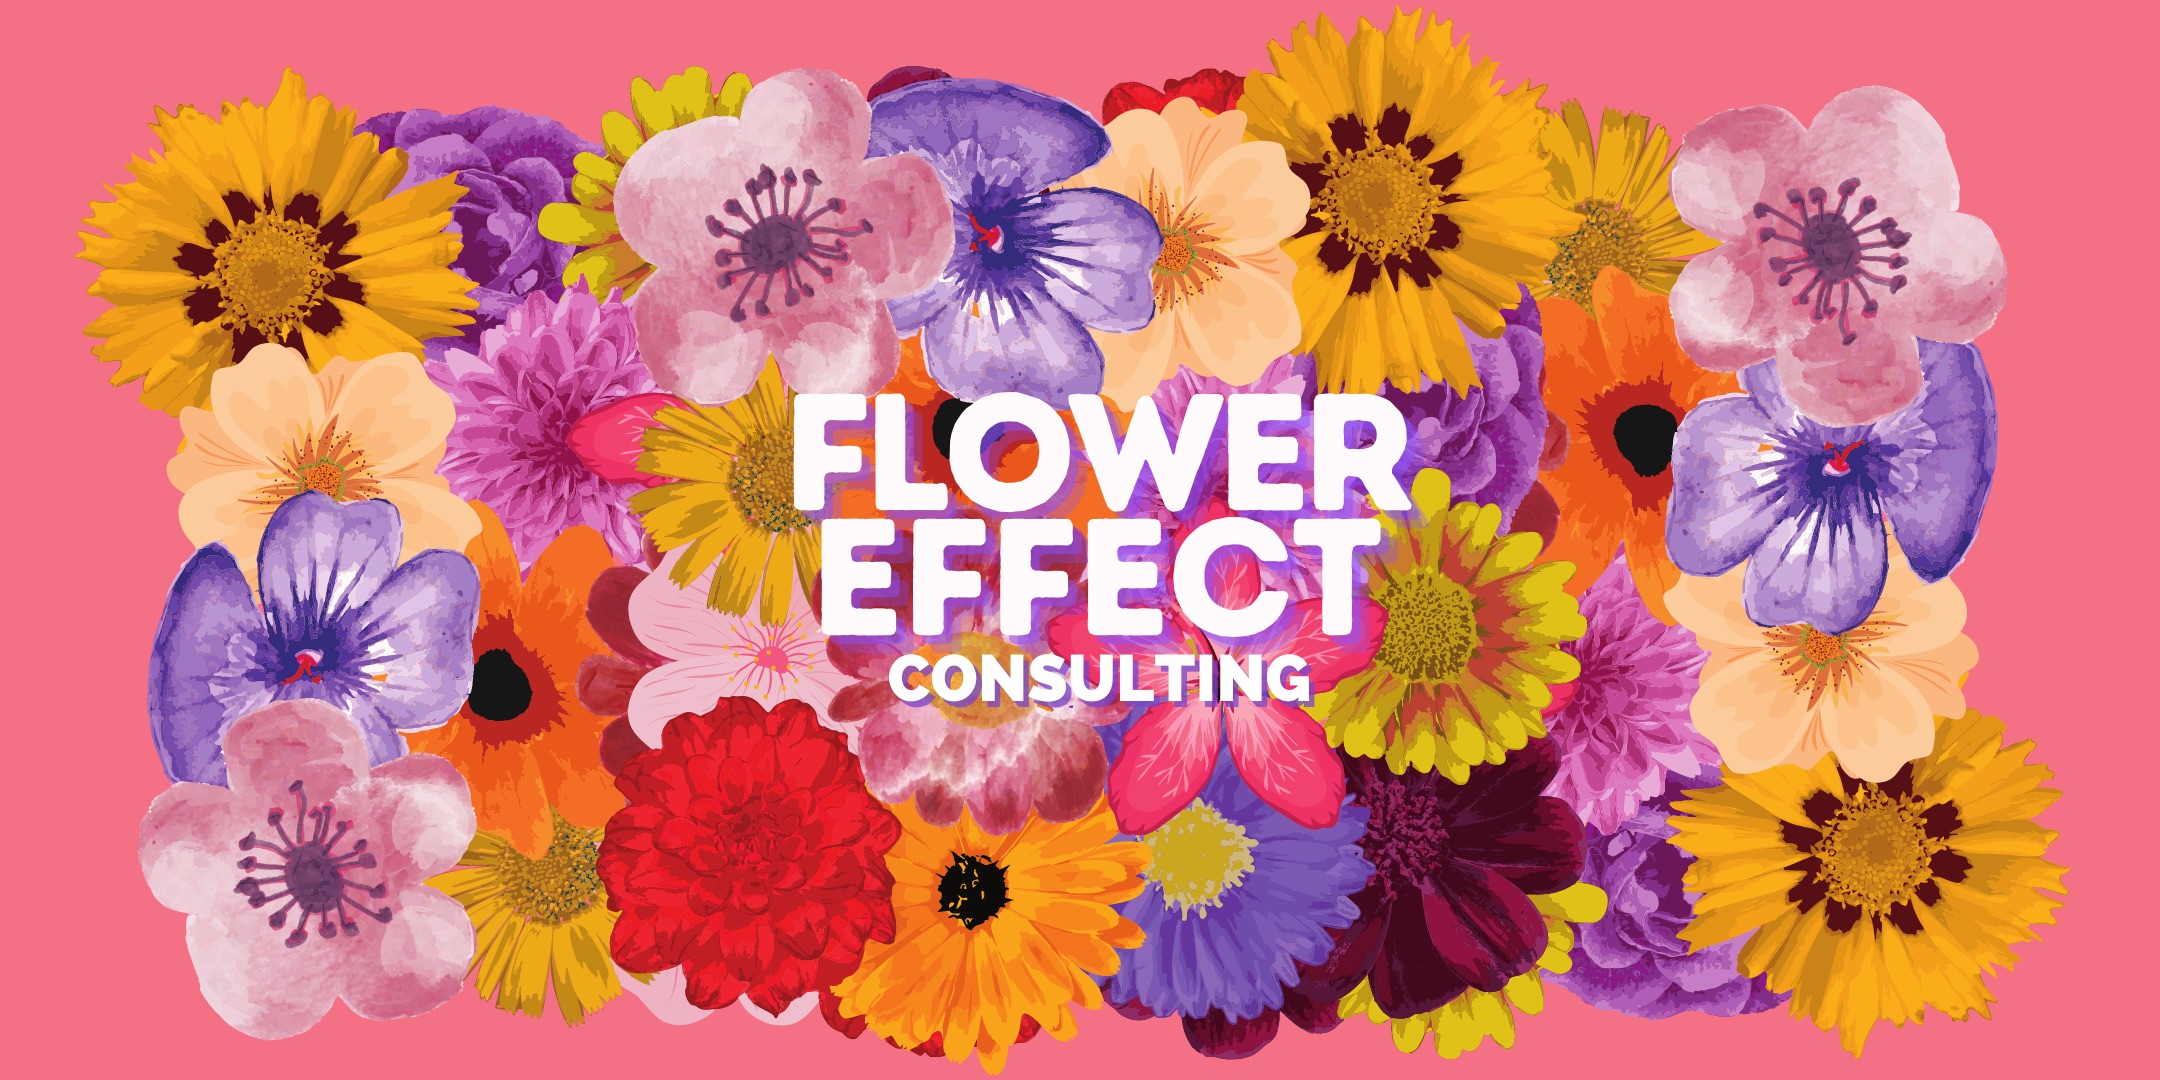 The Flower Effect